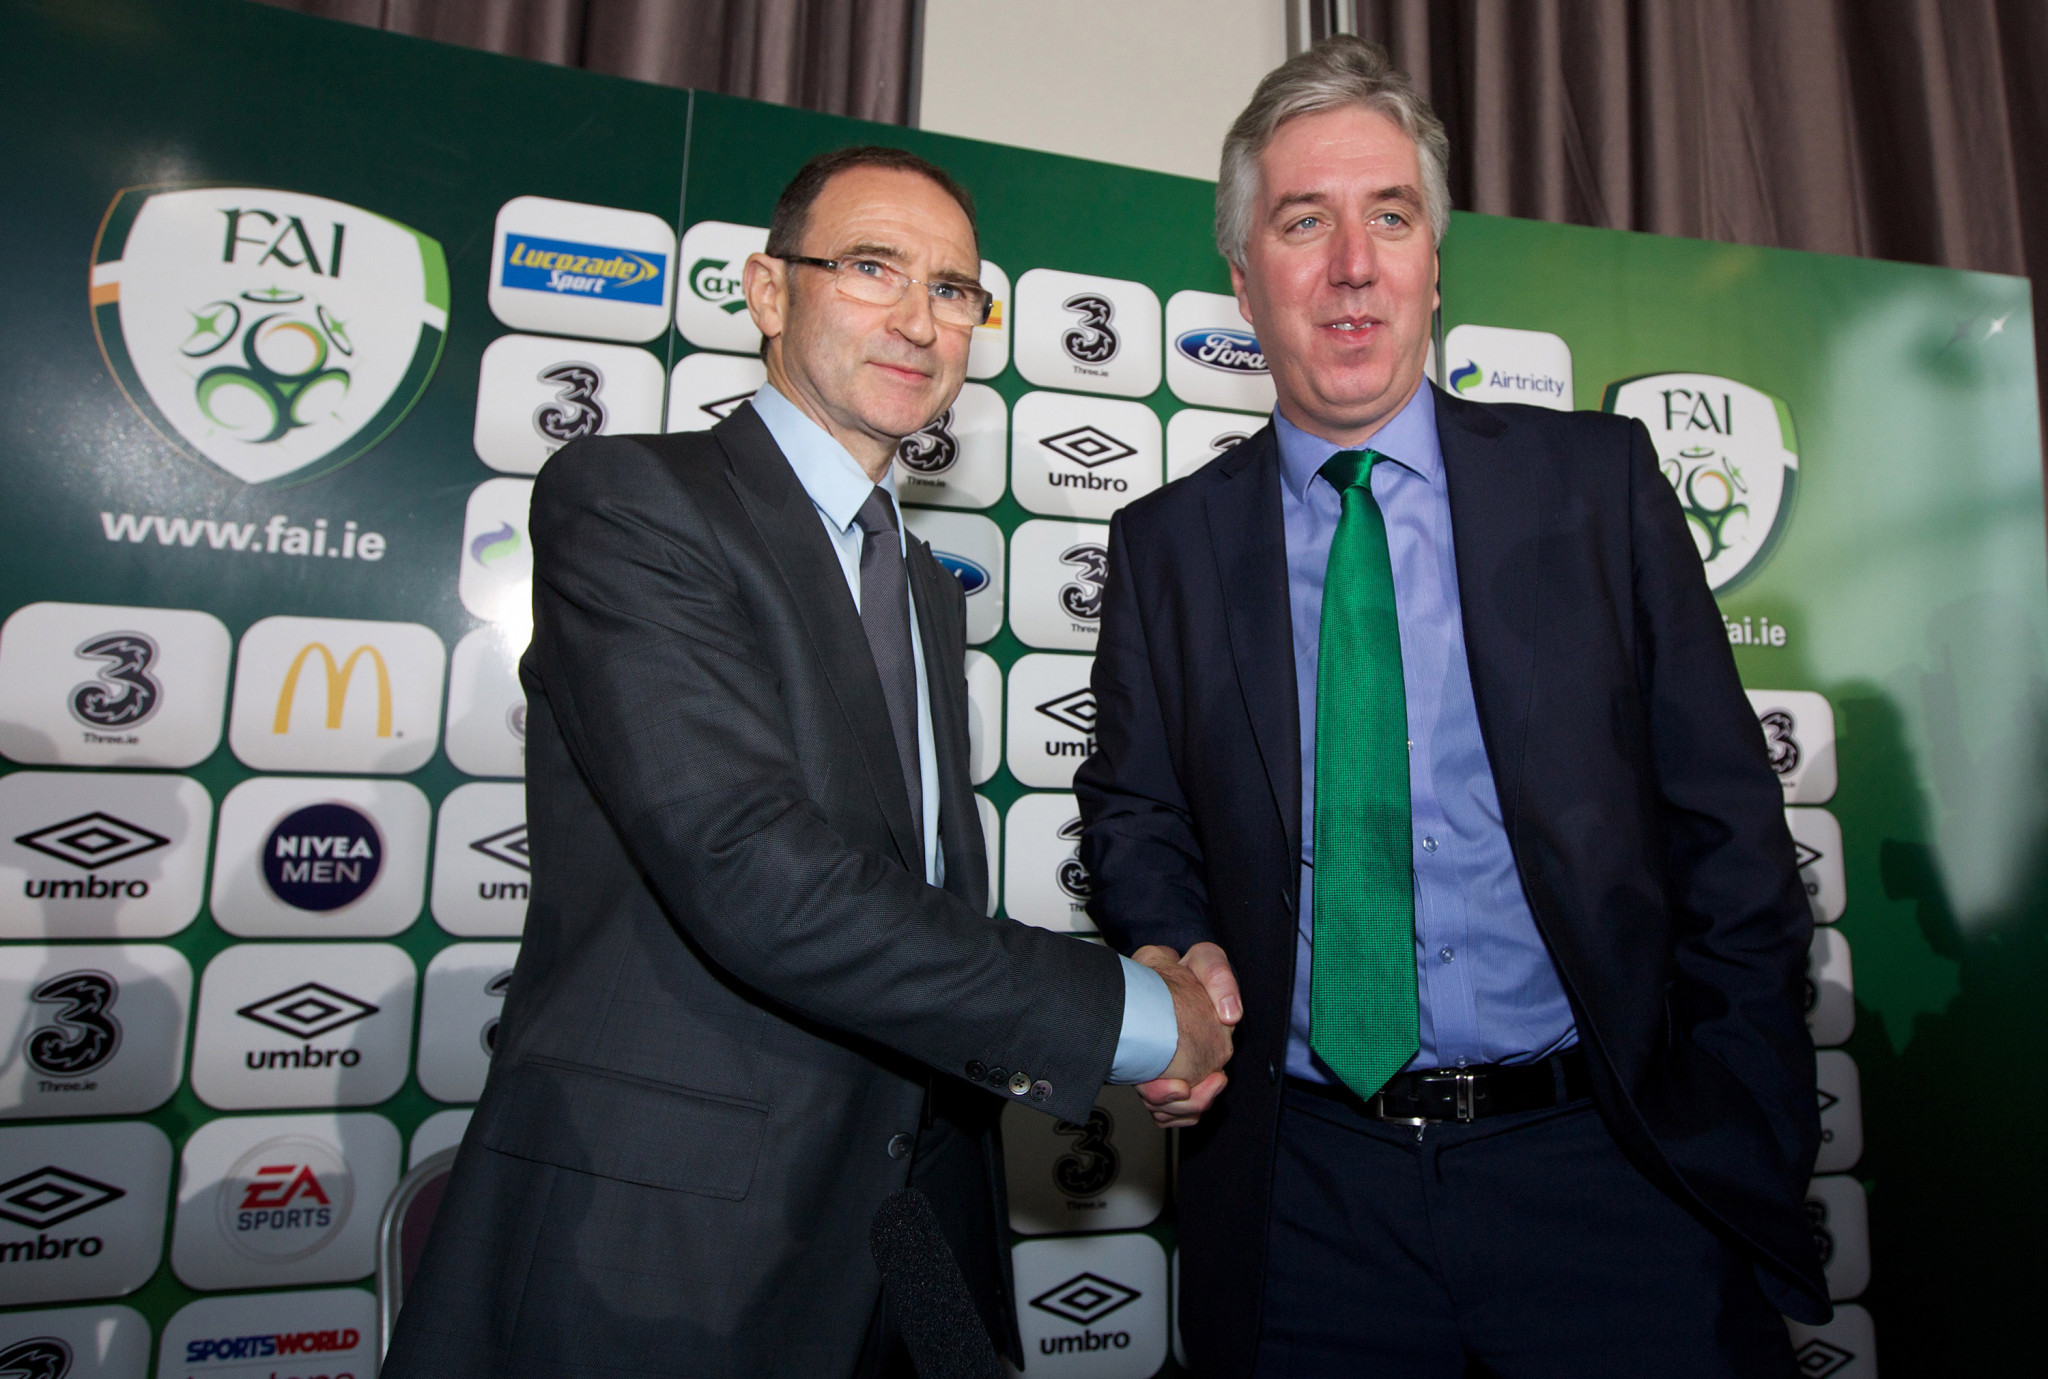 Sport Ireland suspend funding to FAI amid furore over €100,000 "bridging loan" from former chief executive